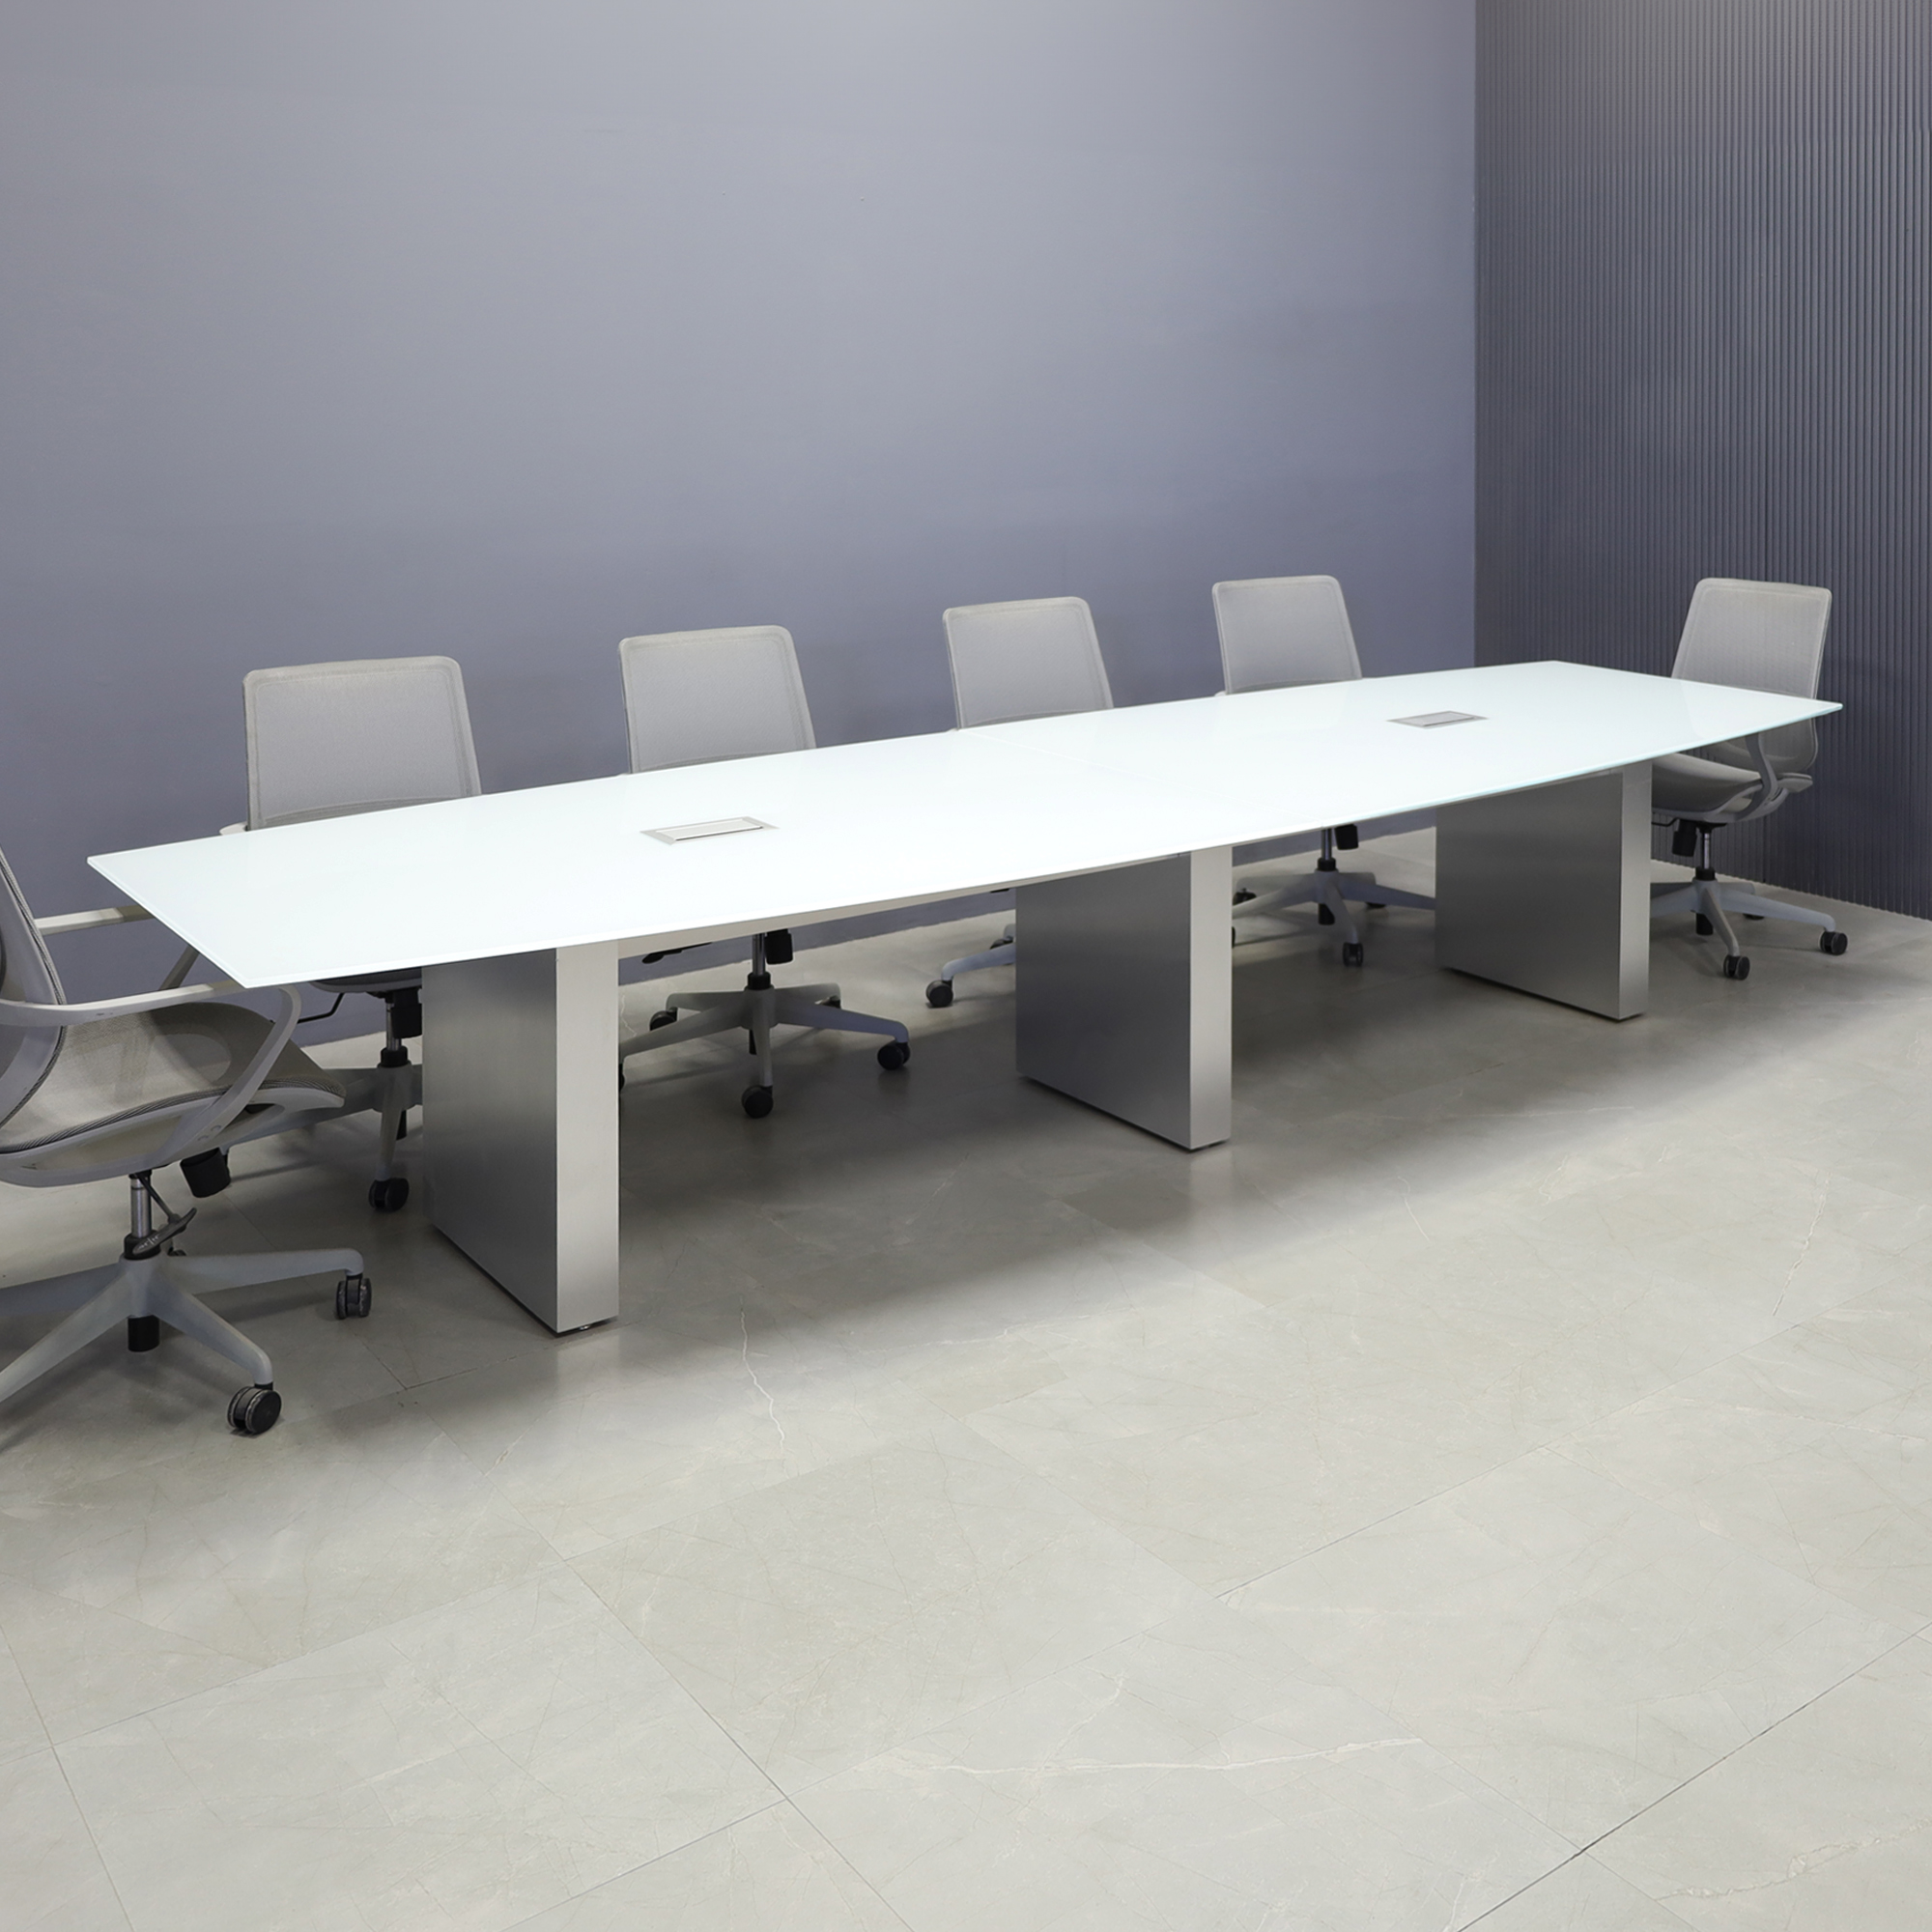 144-inch Omaha Boat Conference Table in 1/2